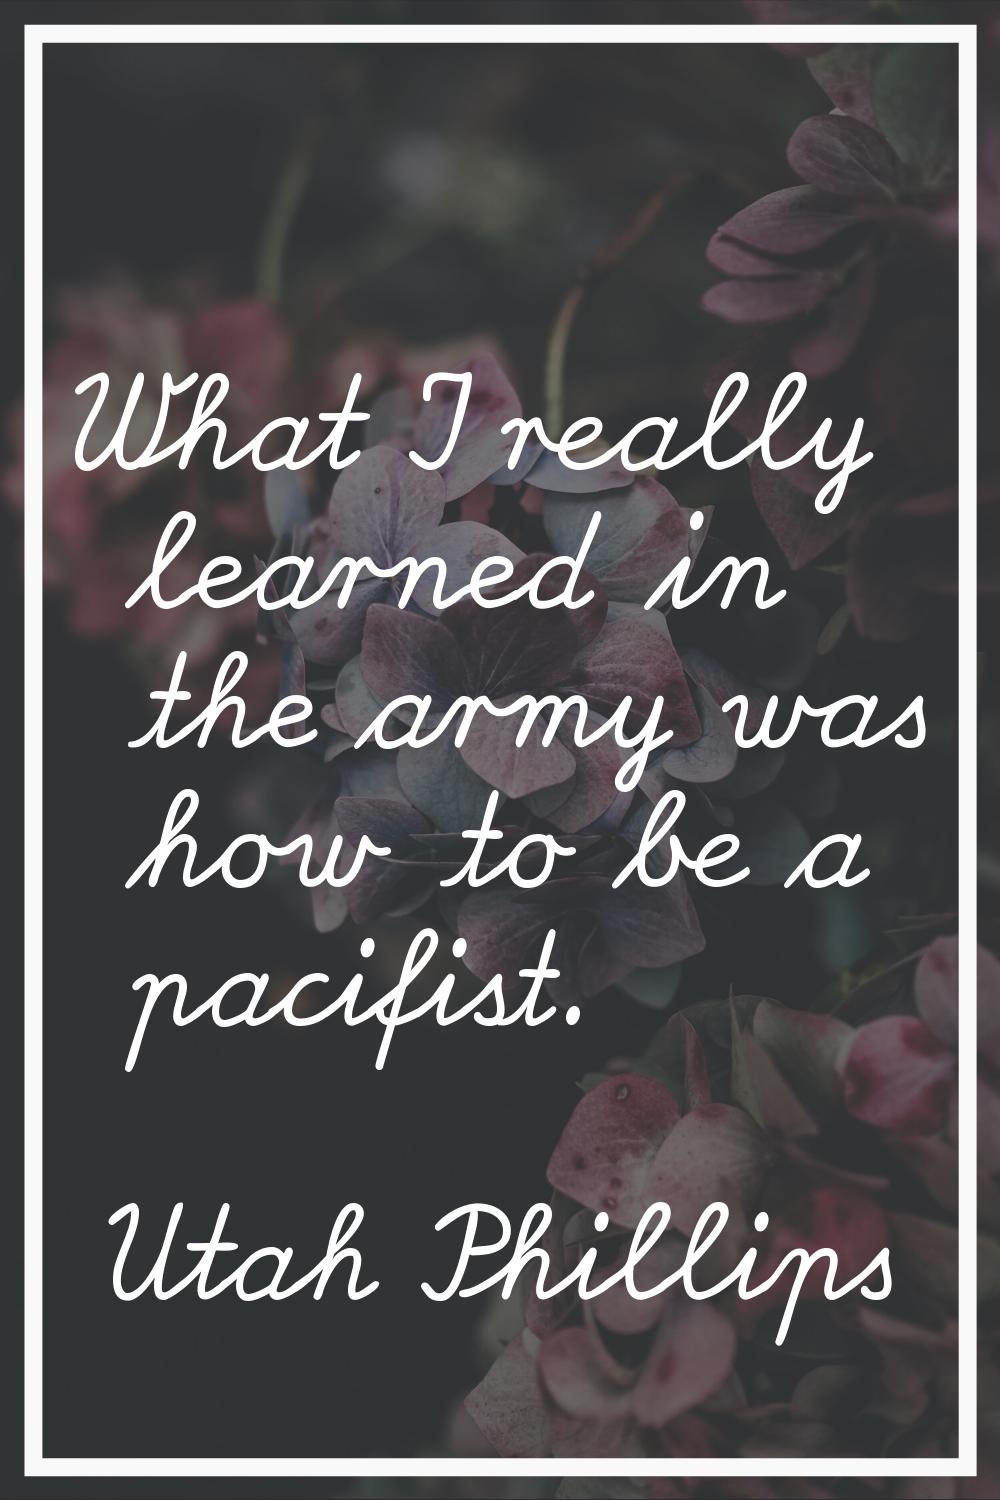 What I really learned in the army was how to be a pacifist.